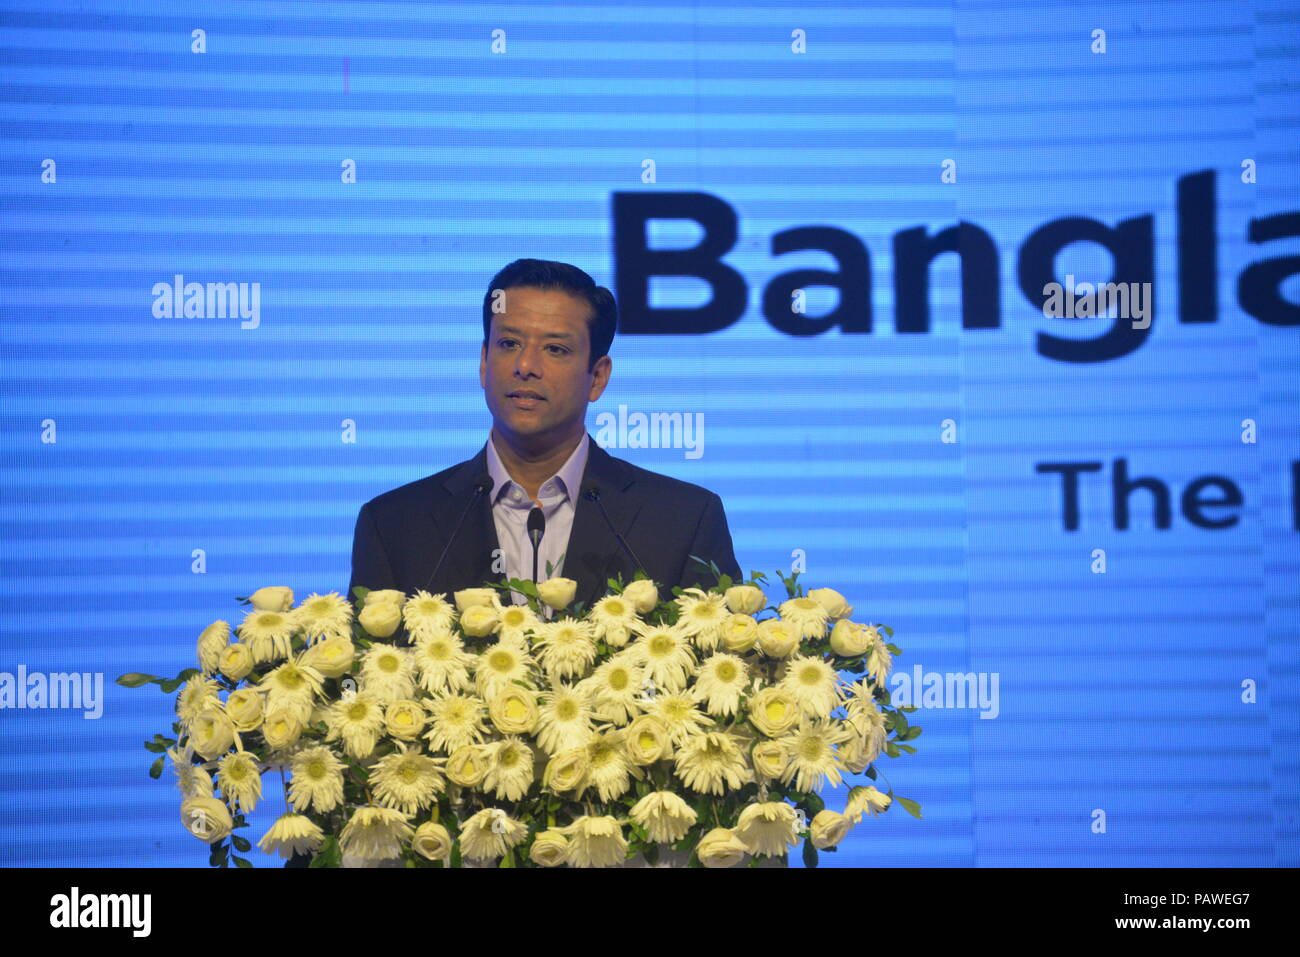 (180725) -- DHAKA, July 25, 2018 (Xinhua) -- Bangladeshi Prime Minister's ICT Affairs Adviser Sajeeb Wazed Joy delivers a speech at the Bangladesh 5G Summit 2018 in Dhaka, Bangladesh, on July 25, 2018. Chinese telecommunications giant Huawei conducted Bangladesh's first trial of fifth generation network (5G) teaming up with the Bangladeshi government's Posts & Telecommunications Division, the Ministry of Posts, Telecommunications and Information Technology and Robi, a joint venture of Axiata Group Berhad (Malaysia), Bharti Airtel Limited (India) and NTT DoCoMo Inc. (Japan), at a ceremony in th Stock Photo